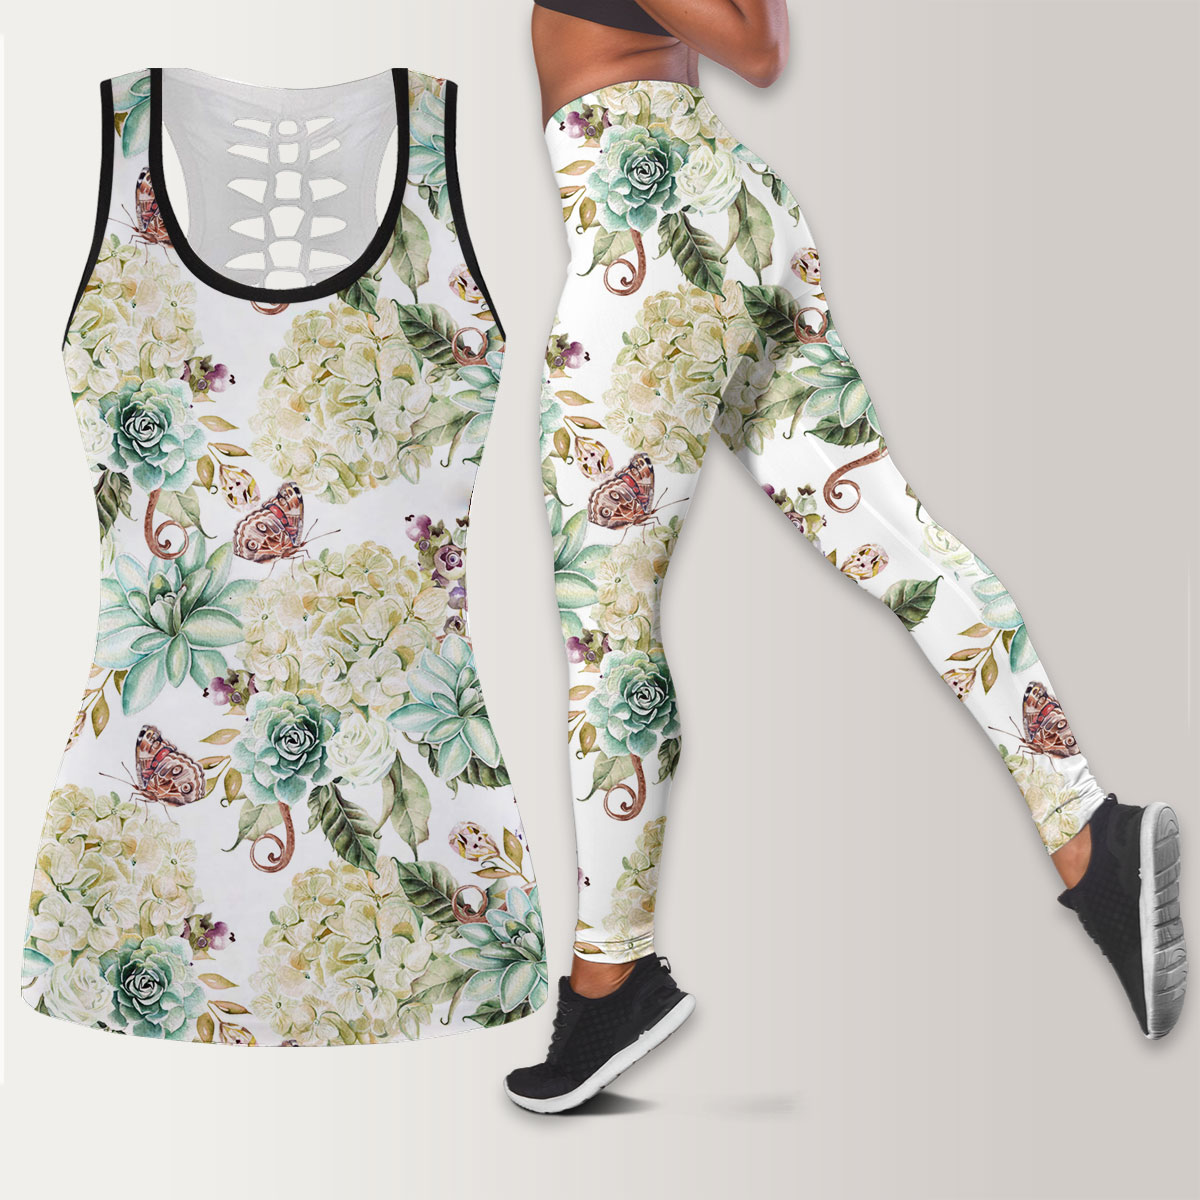 Bright Watercolor With Flowers Hydrangea, Rose And Succulents Legging Tank Top set